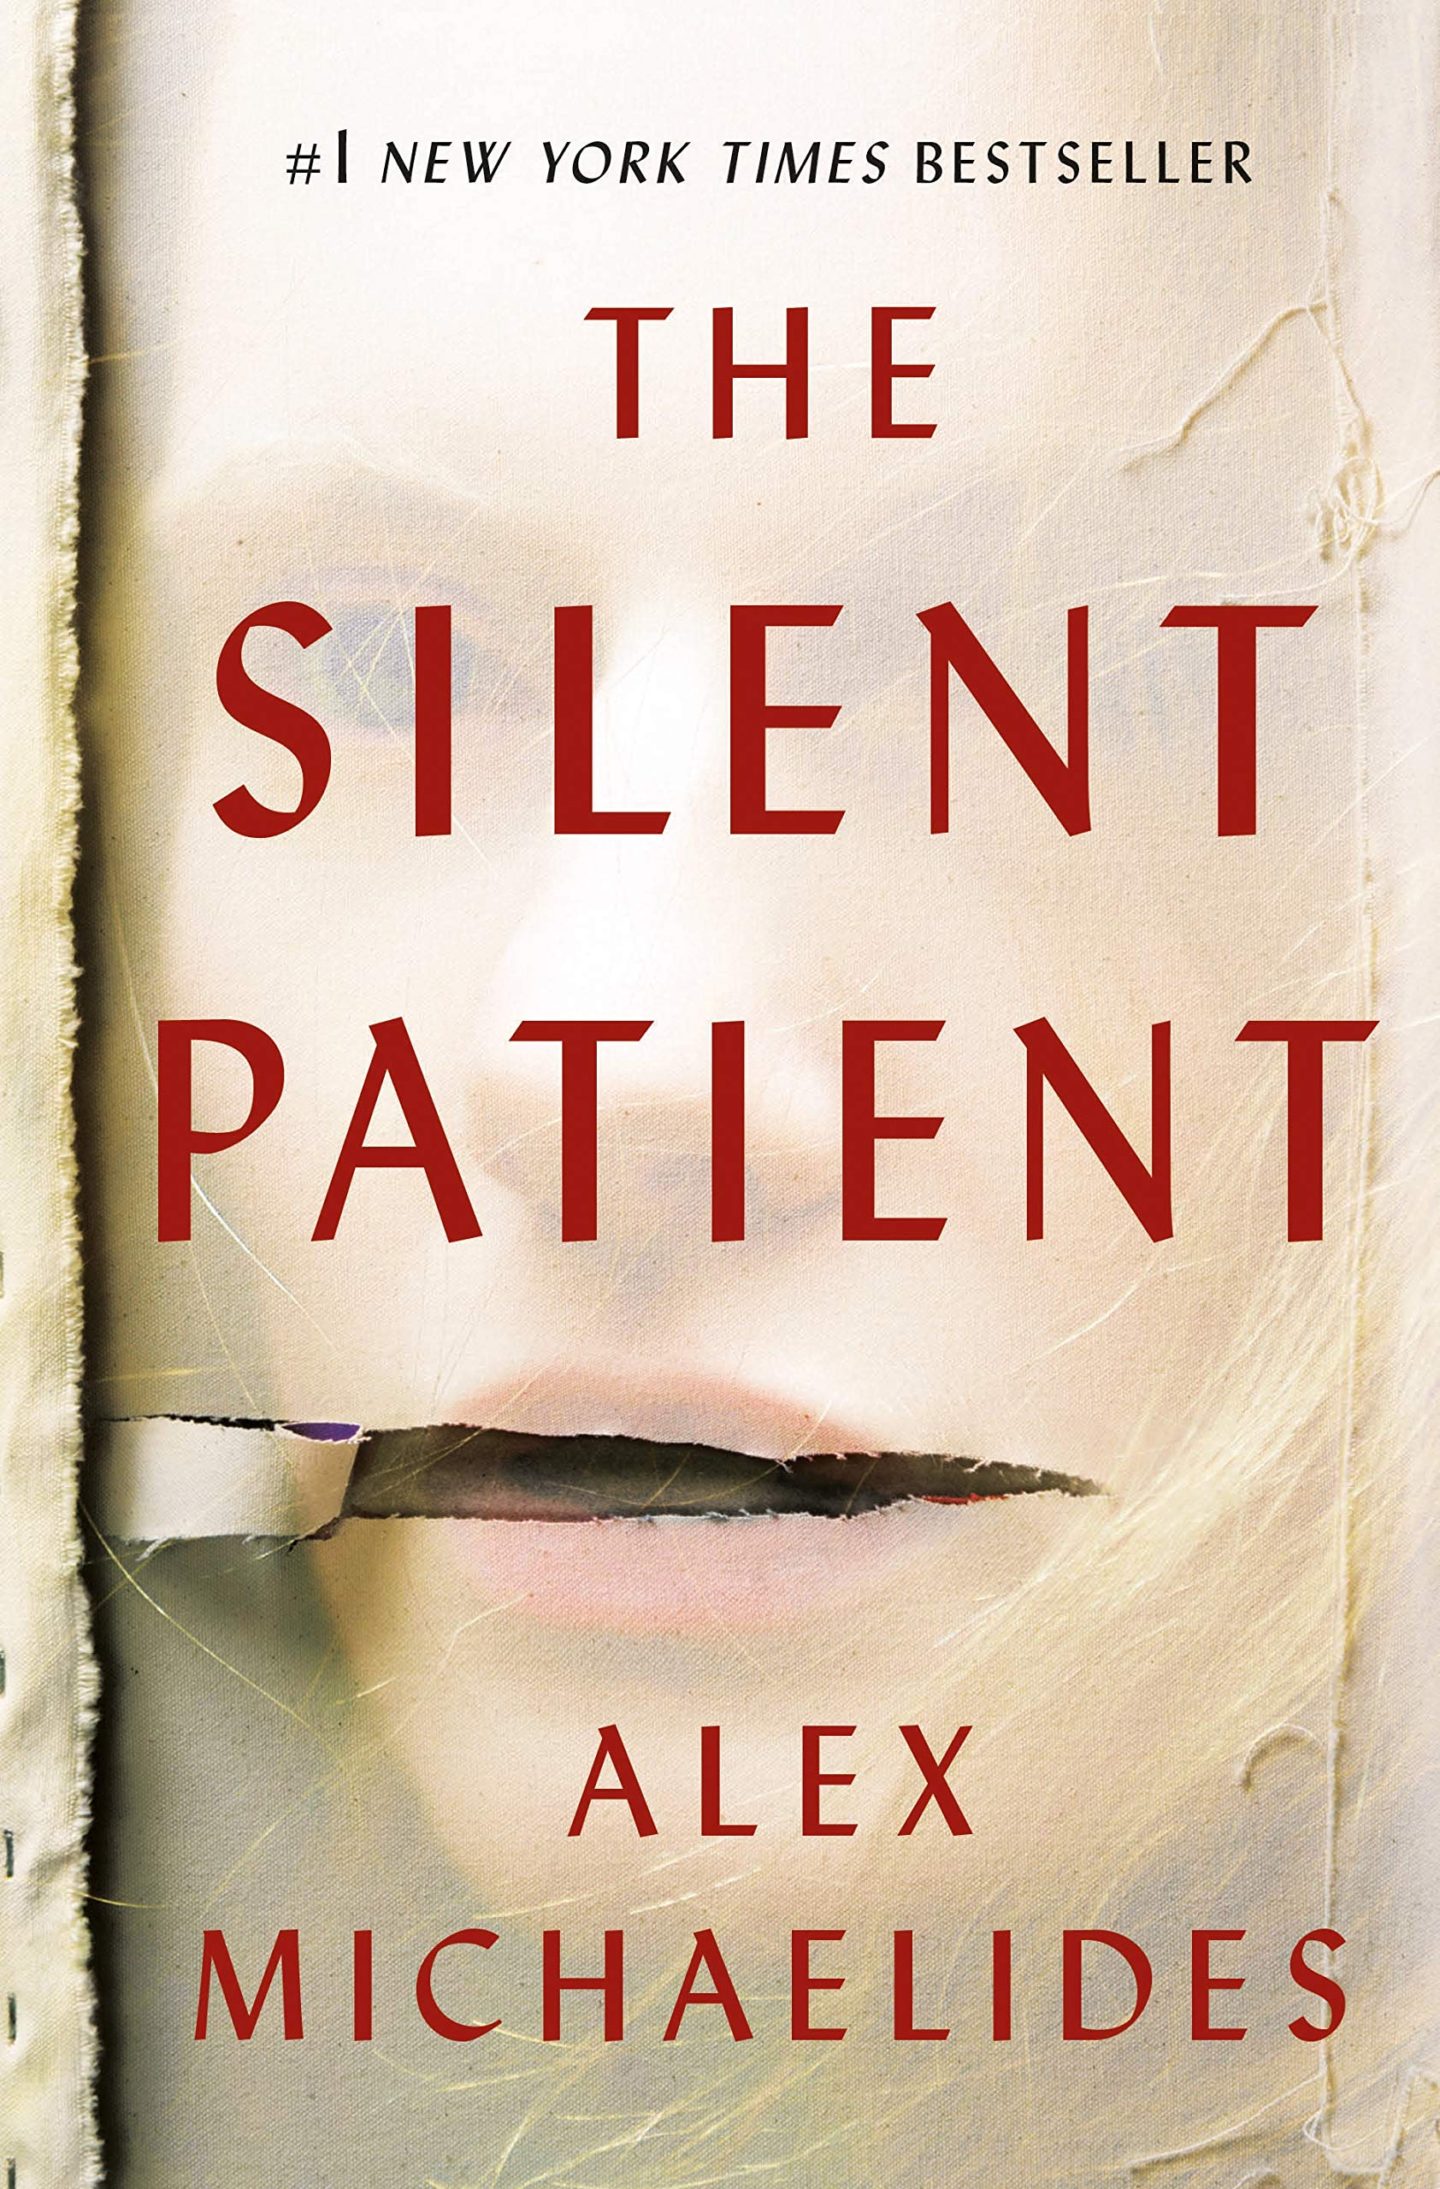 The-Silent-Patient-by-Alex-Michaelides-1440x2189 My Complete Reading List for 2021